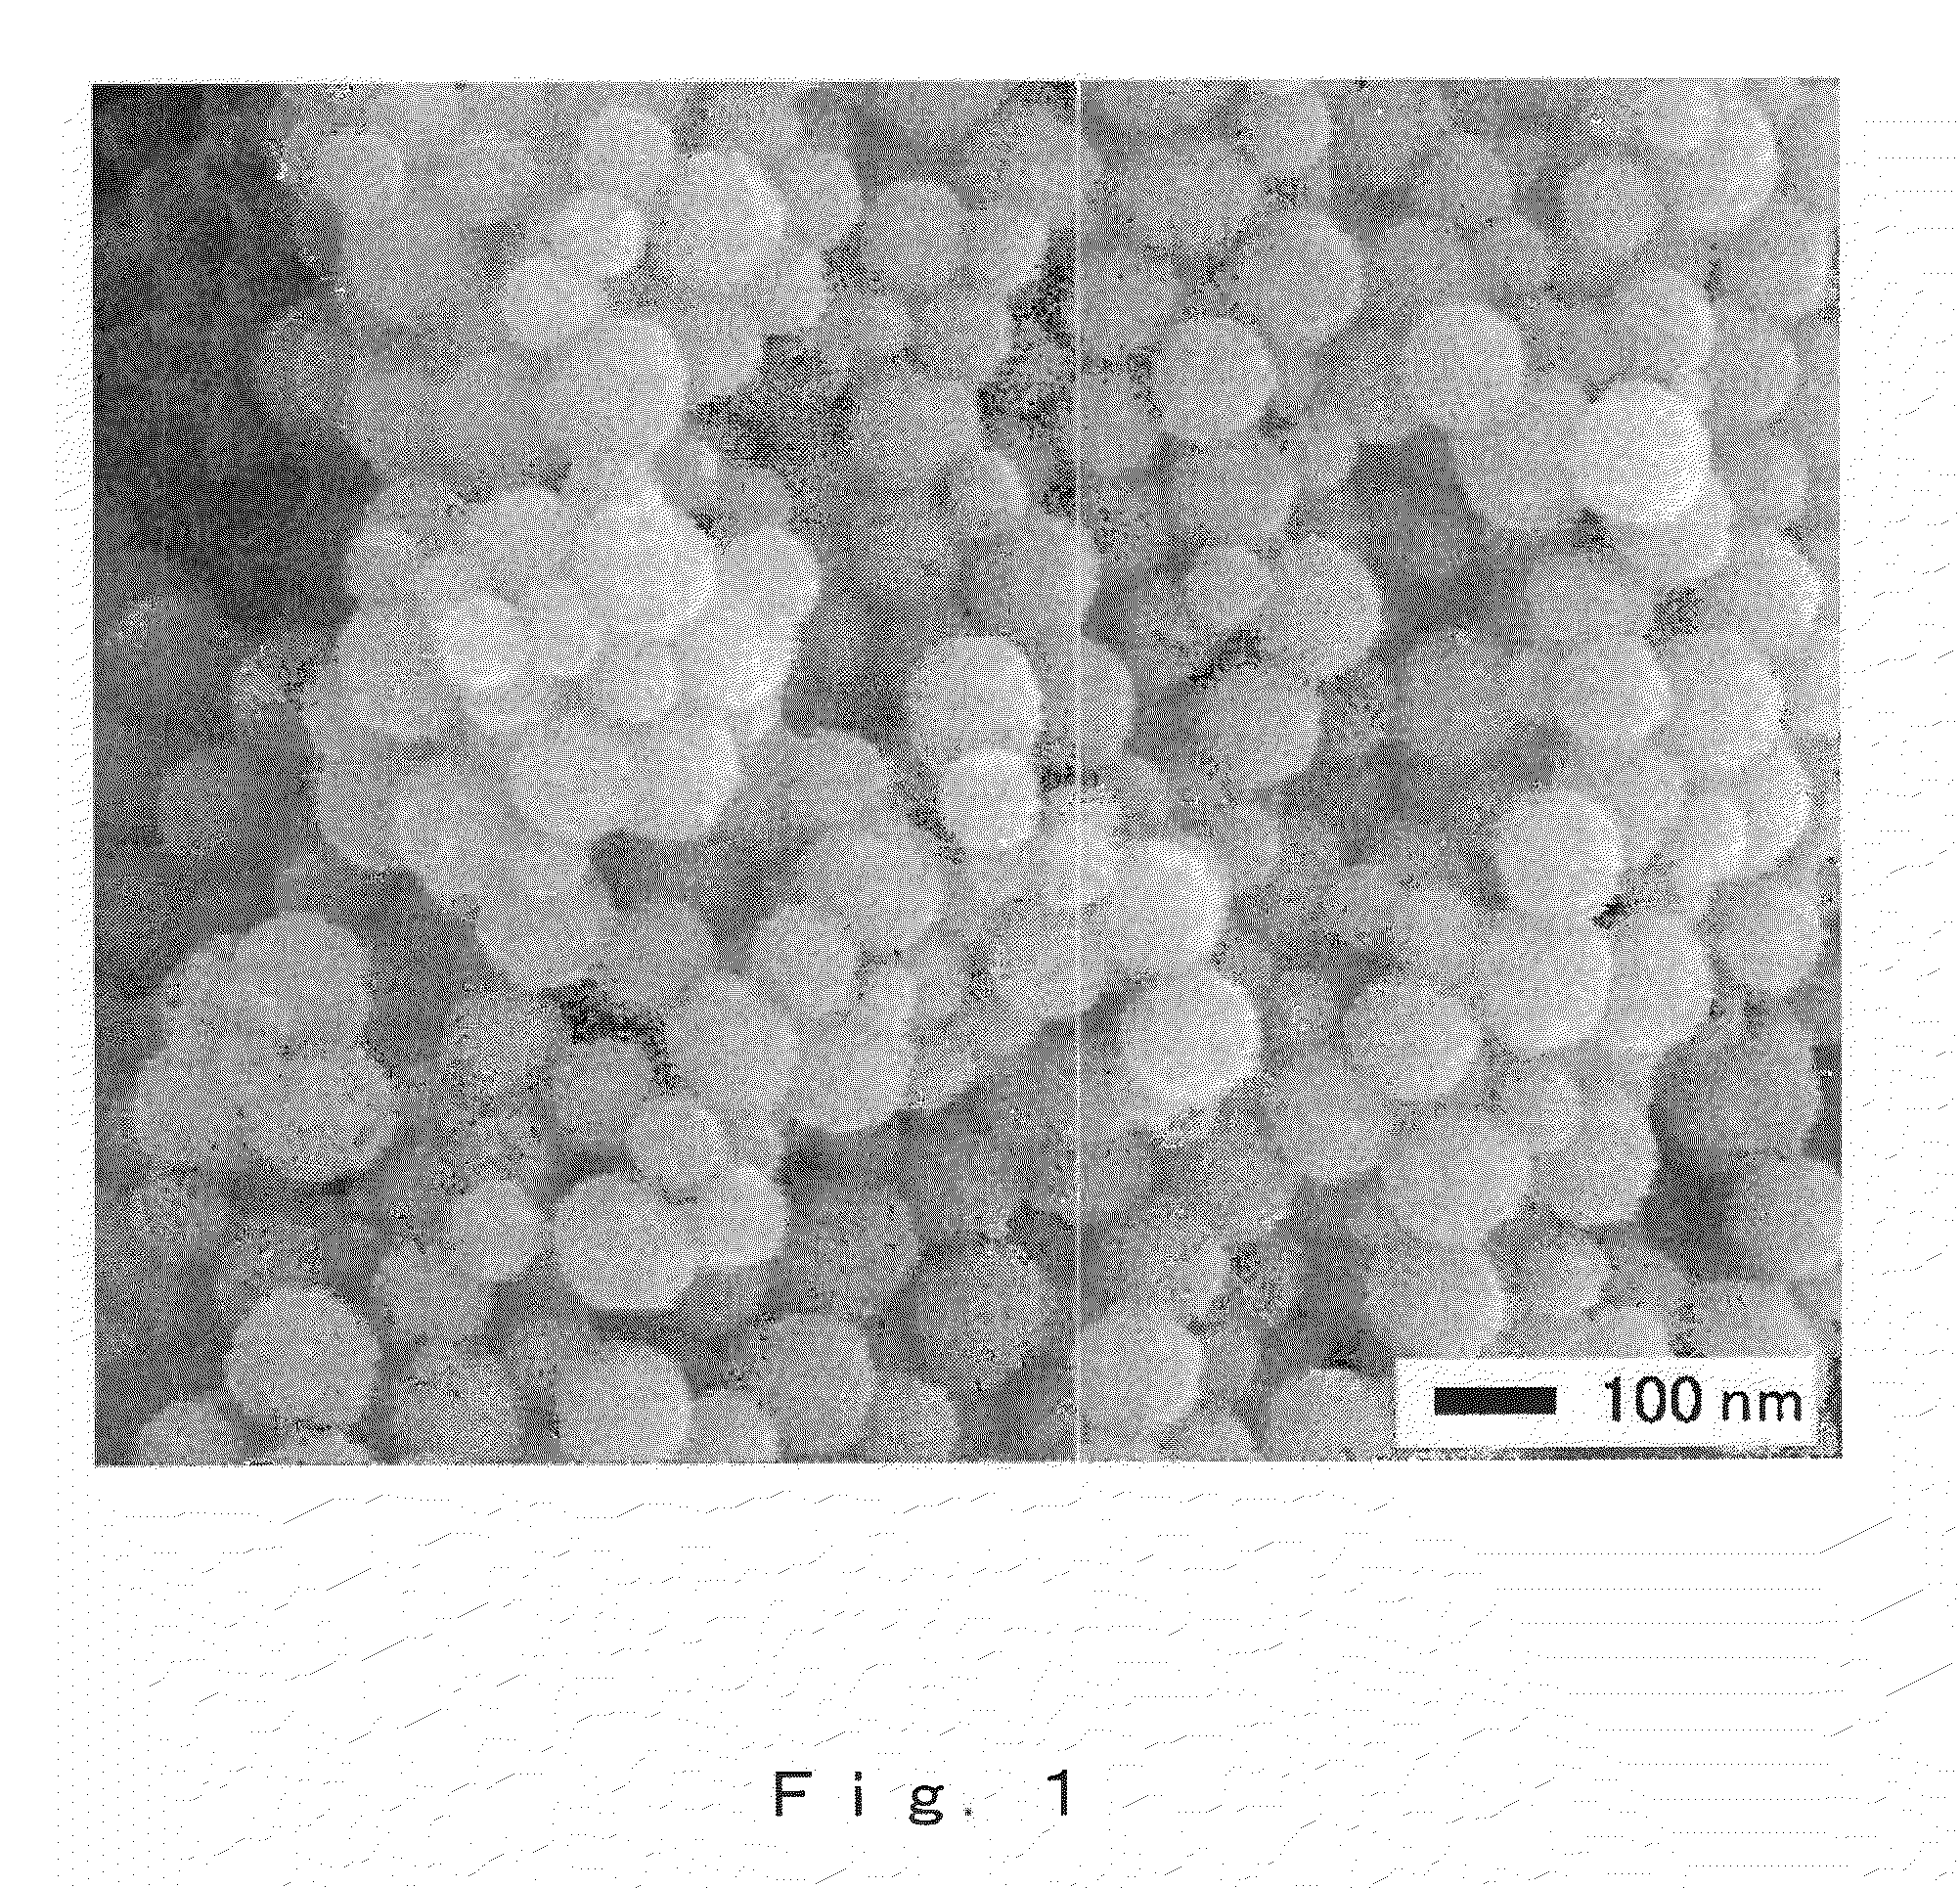 Core-shell-type cerium oxide microparticle, dispersion solution comprising the microparticle, and process for production of the microparticle or dispersion solution